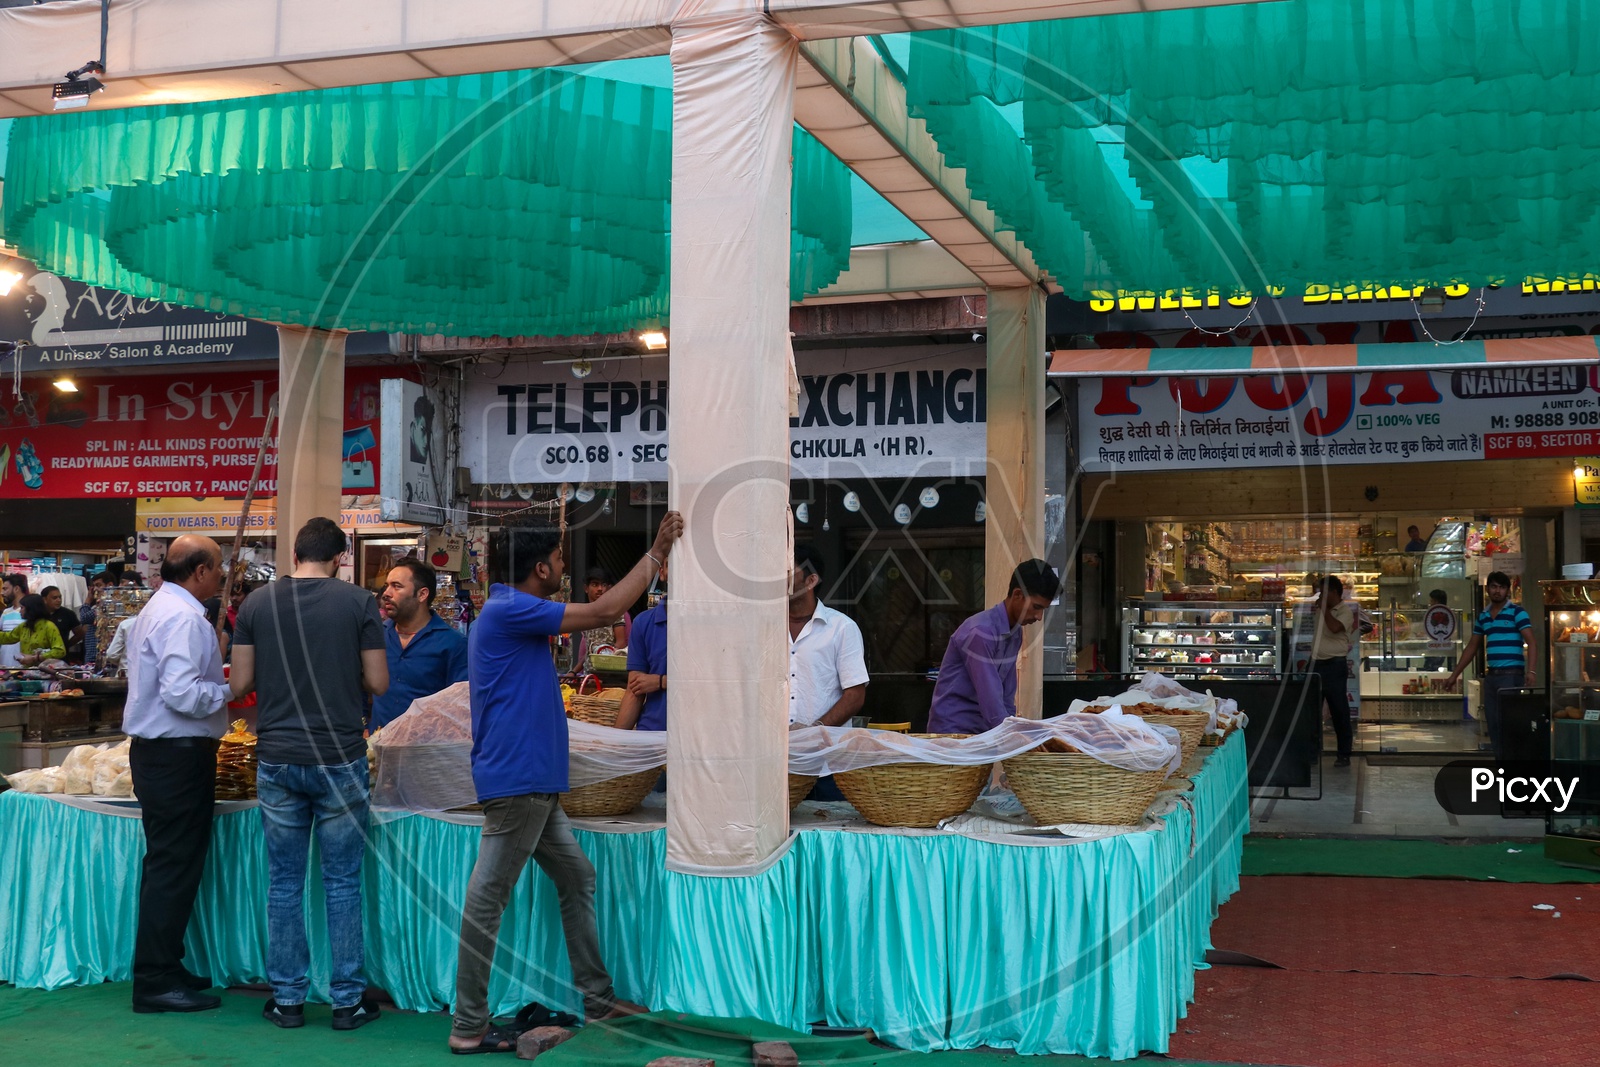 Street Food Stalls Of Traditional Indian Food During Festival Season